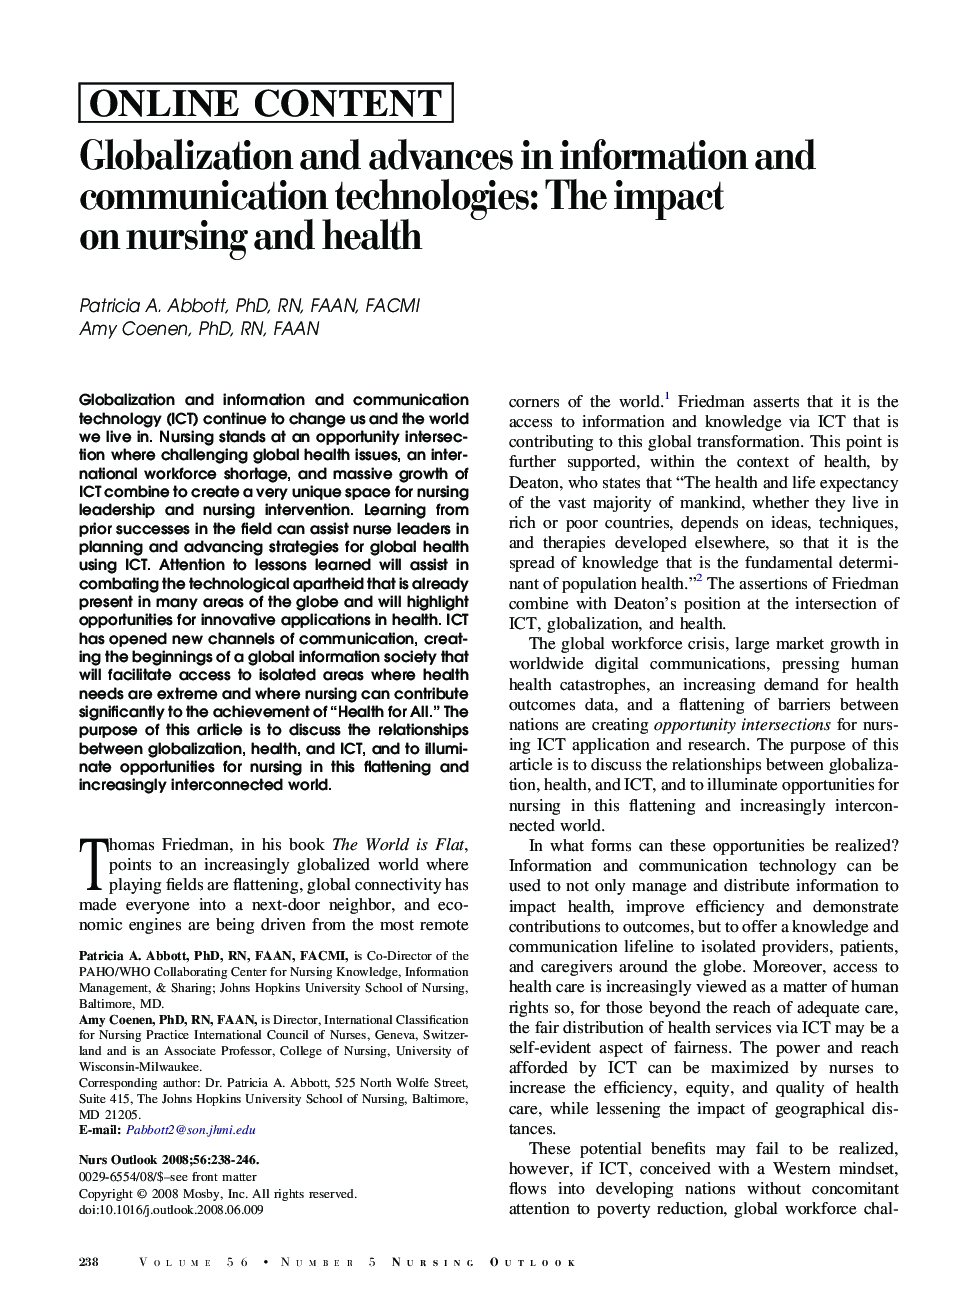 Globalization and advances in information and communication technologies: The impact on nursing and health